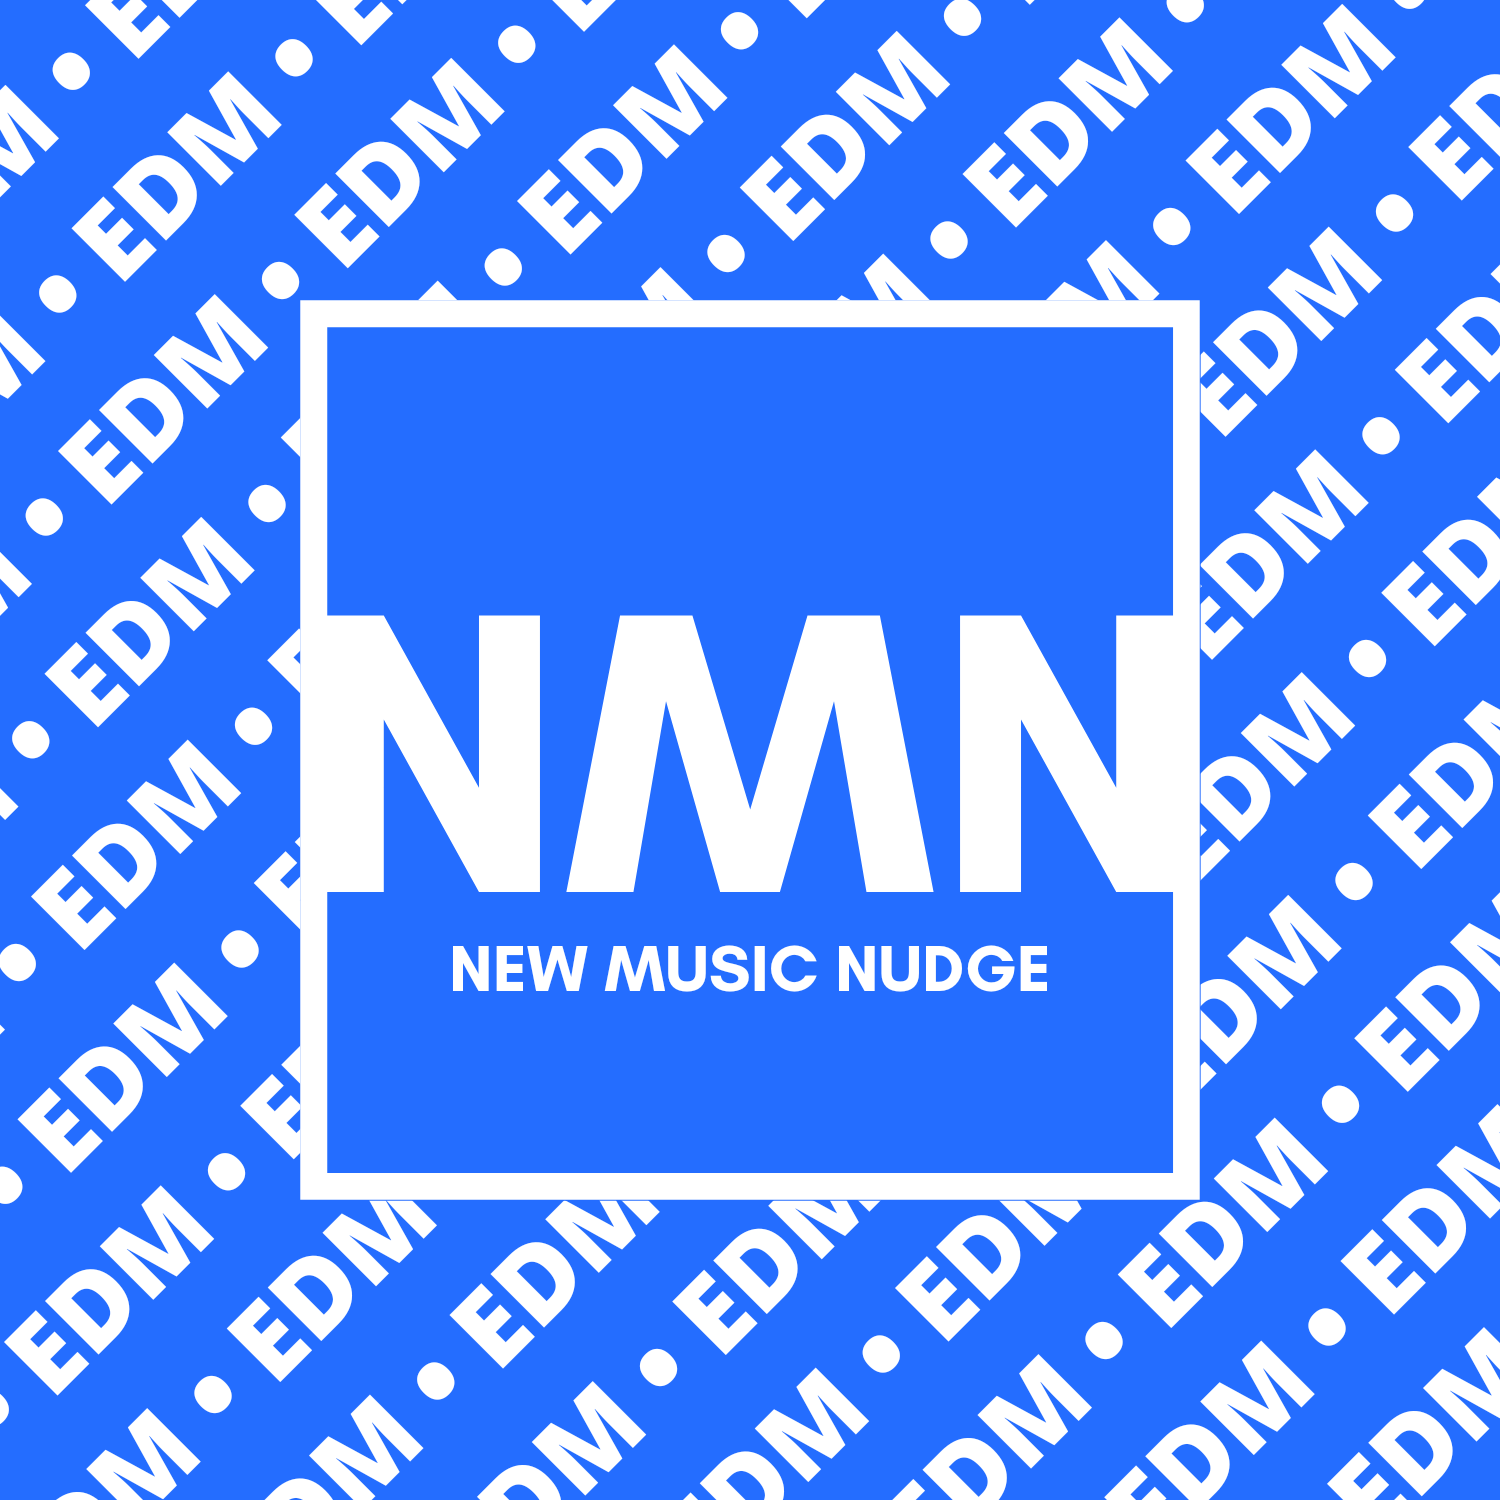 New Music Nudge EDM - he only place where you can find the newest EDM releases. From Drum & Bass to Dubstep and Dance to Trance we have it!